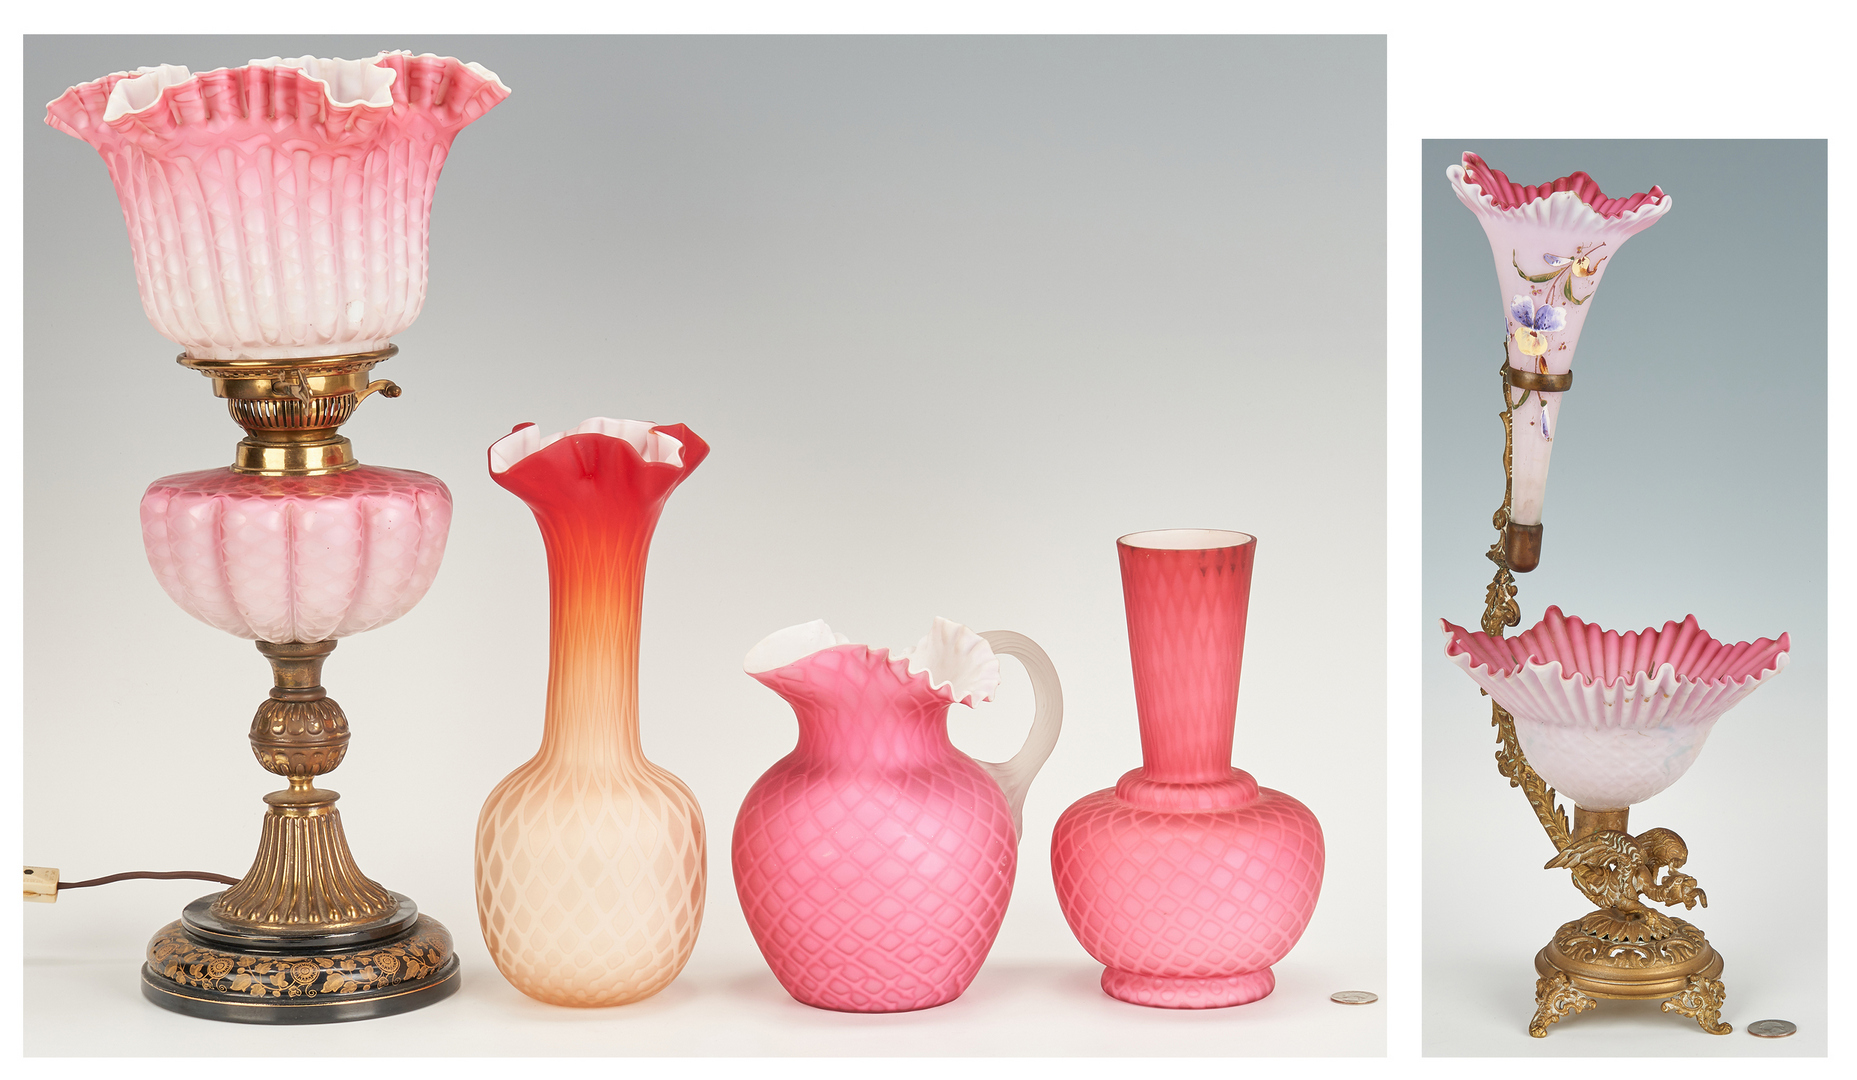 Lot 464: 5 Art Glass/Satin Glass Items, incl. Epergne, Lamp, Pitcher, Vases